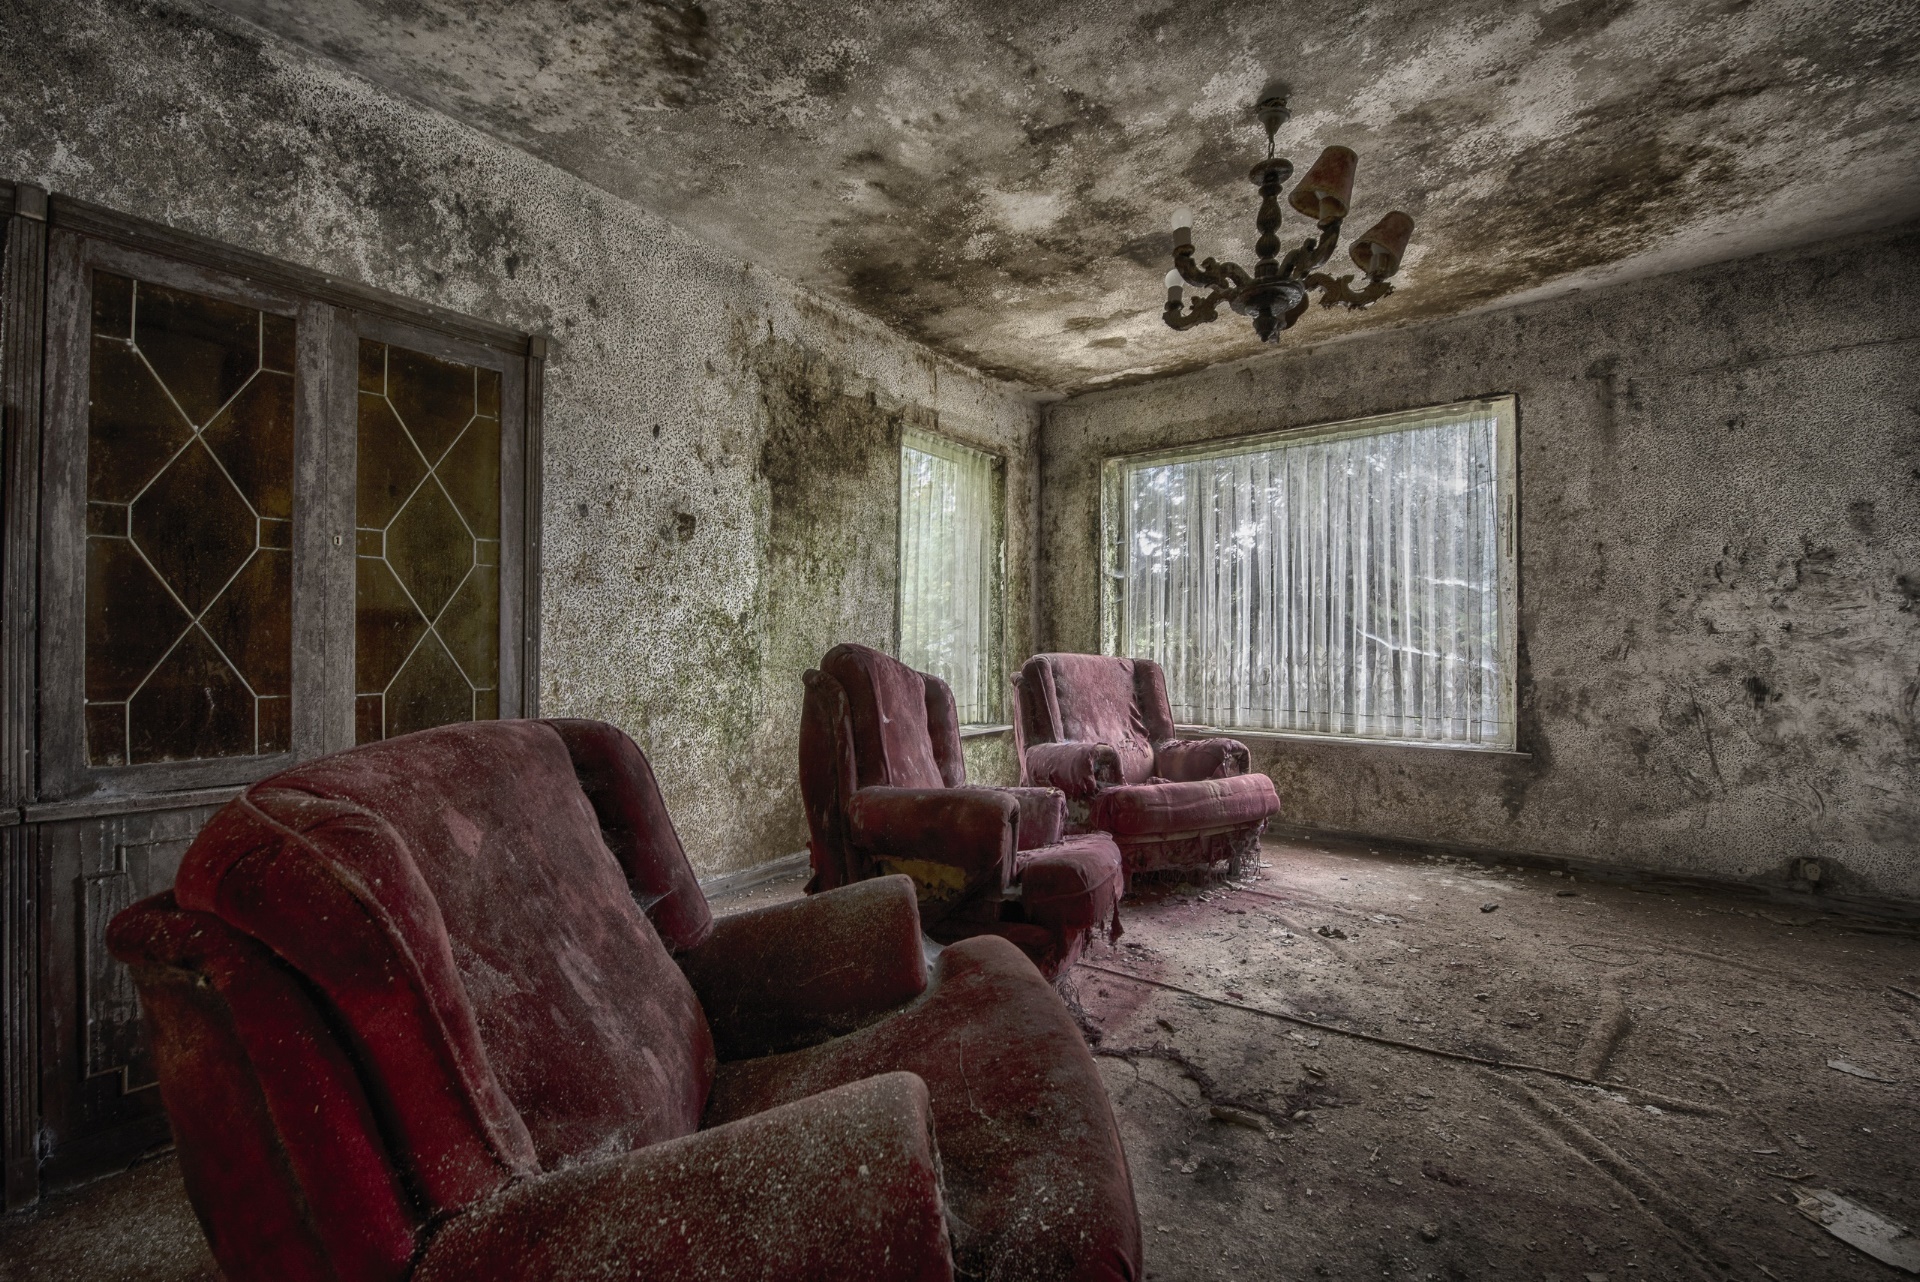 General 1920x1282 old chair room interior ruins dust abandoned